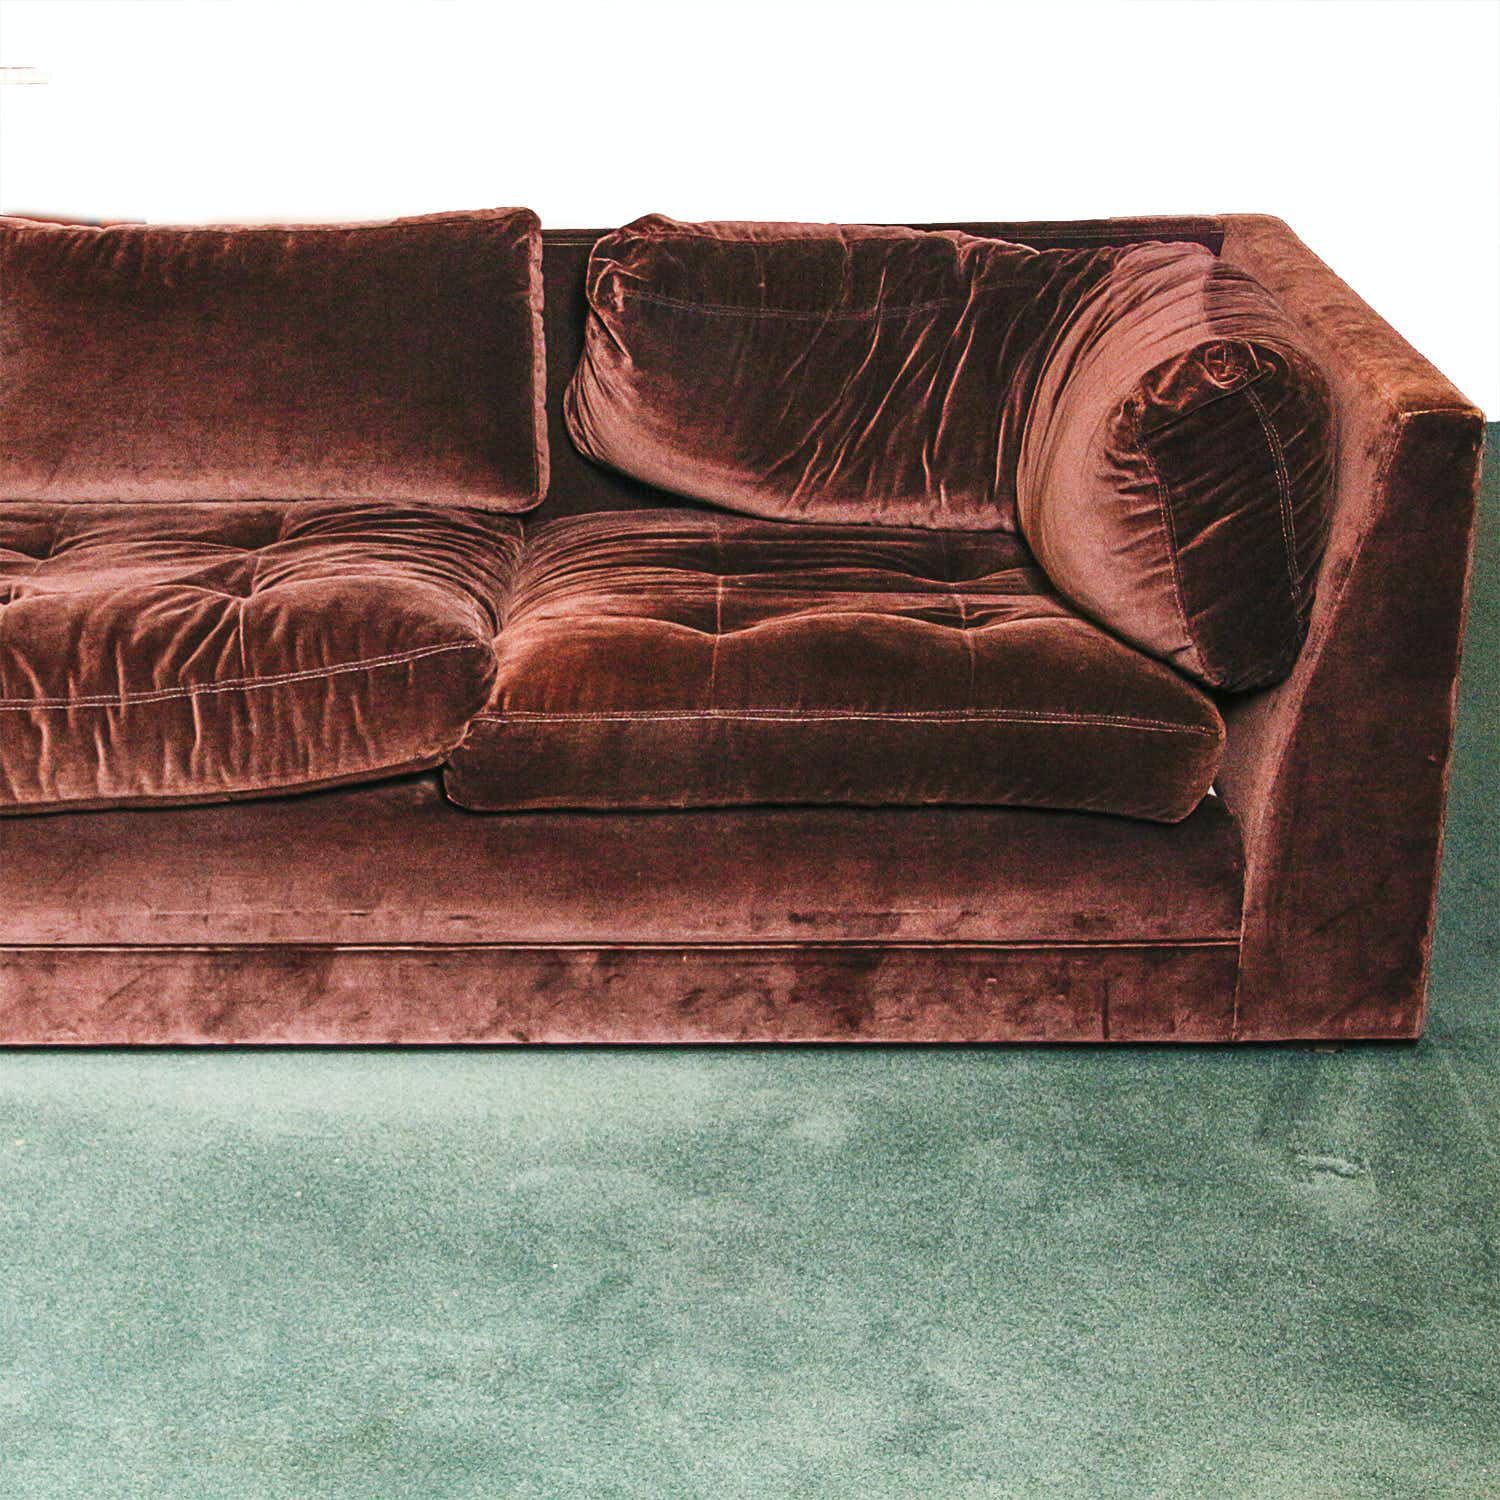 Chocolate Brown Velvet Upholstered Sectional Sofa : Ebth Pertaining To Sofas In Chocolate Brown (View 10 of 20)